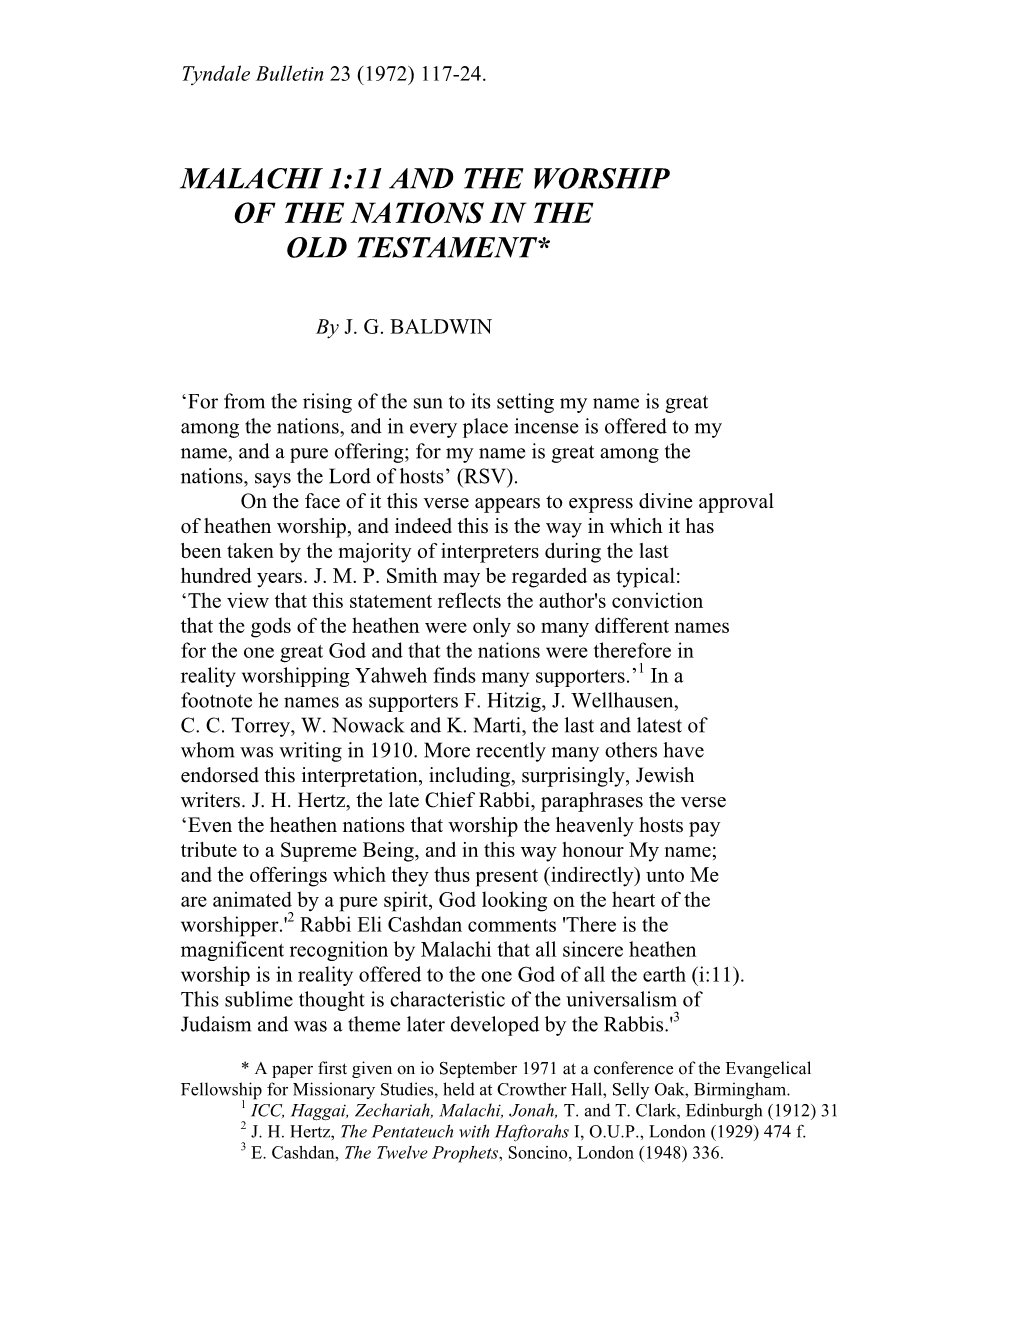 Malachi 1:11 and the Worship of the Nations in the Old Testament*